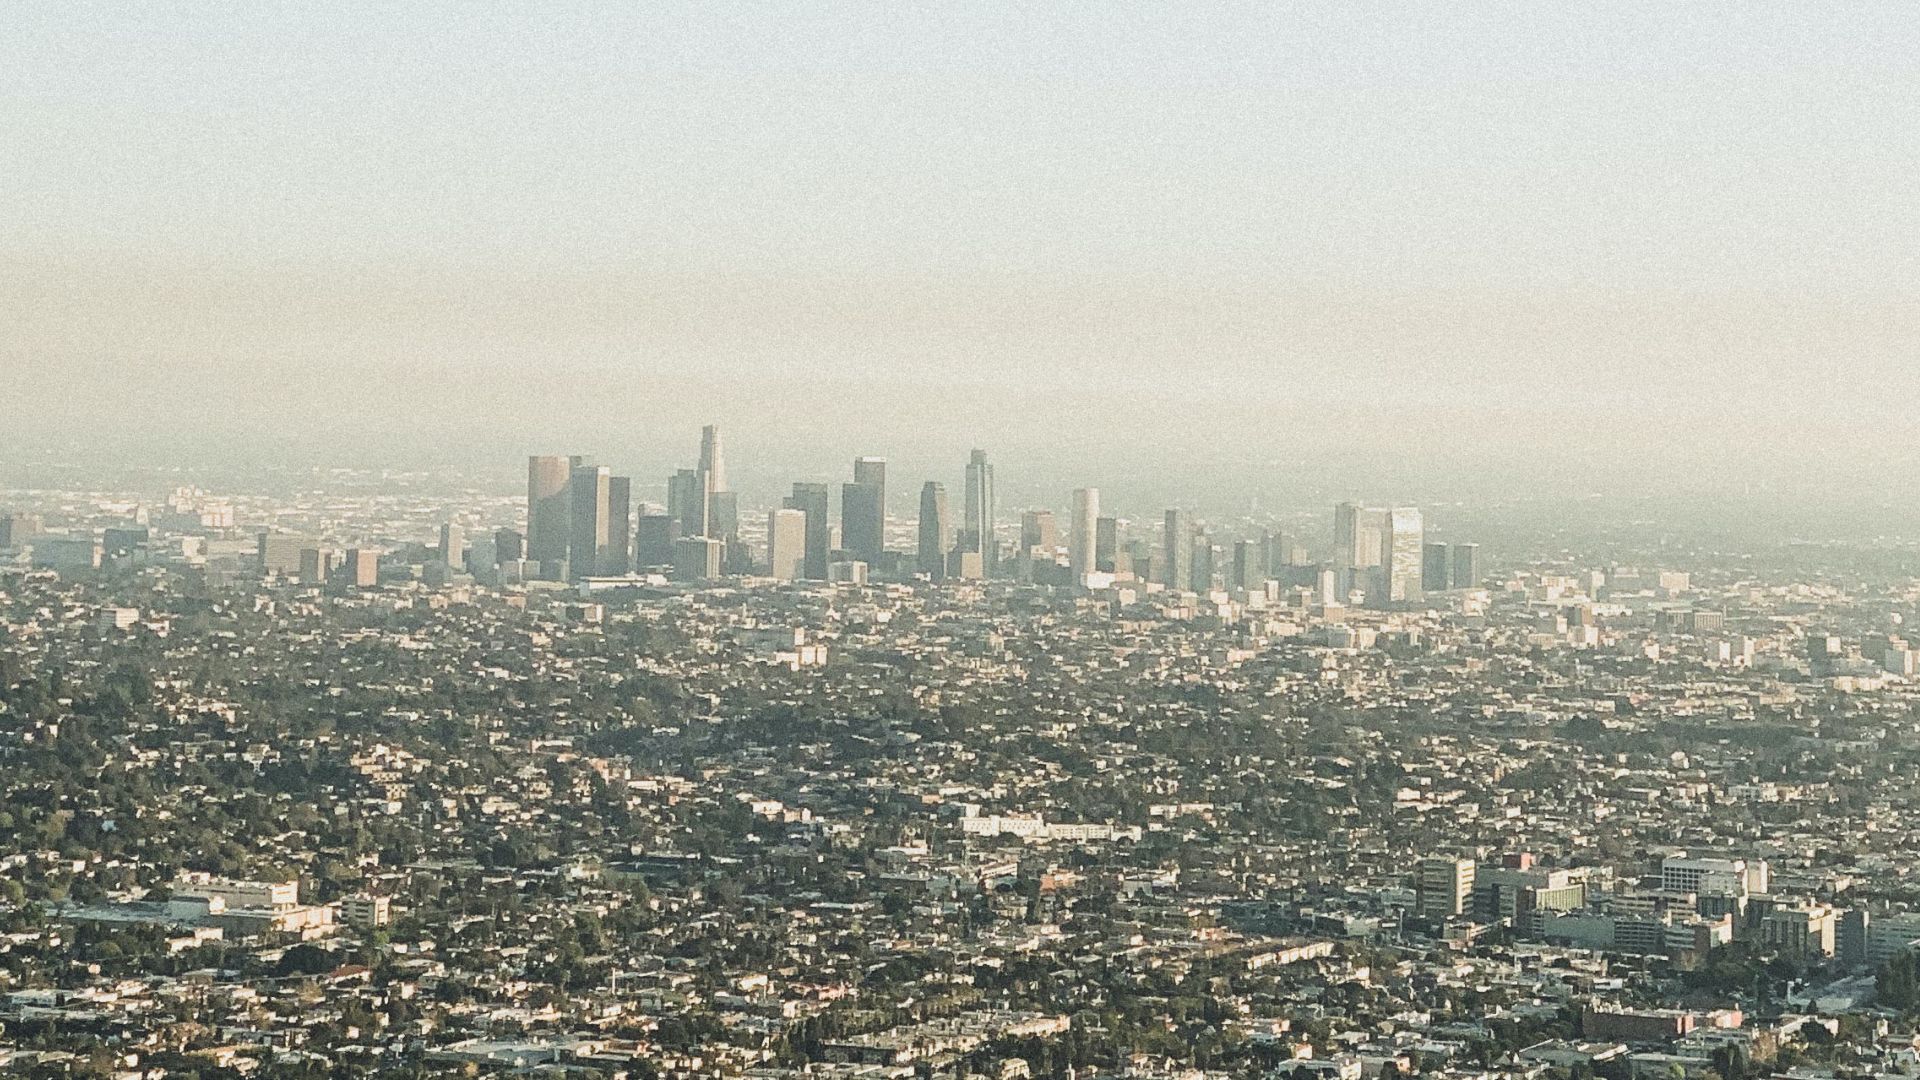 A skyline view of Downtown Los Angeles, covered by smog from carbon emissions.